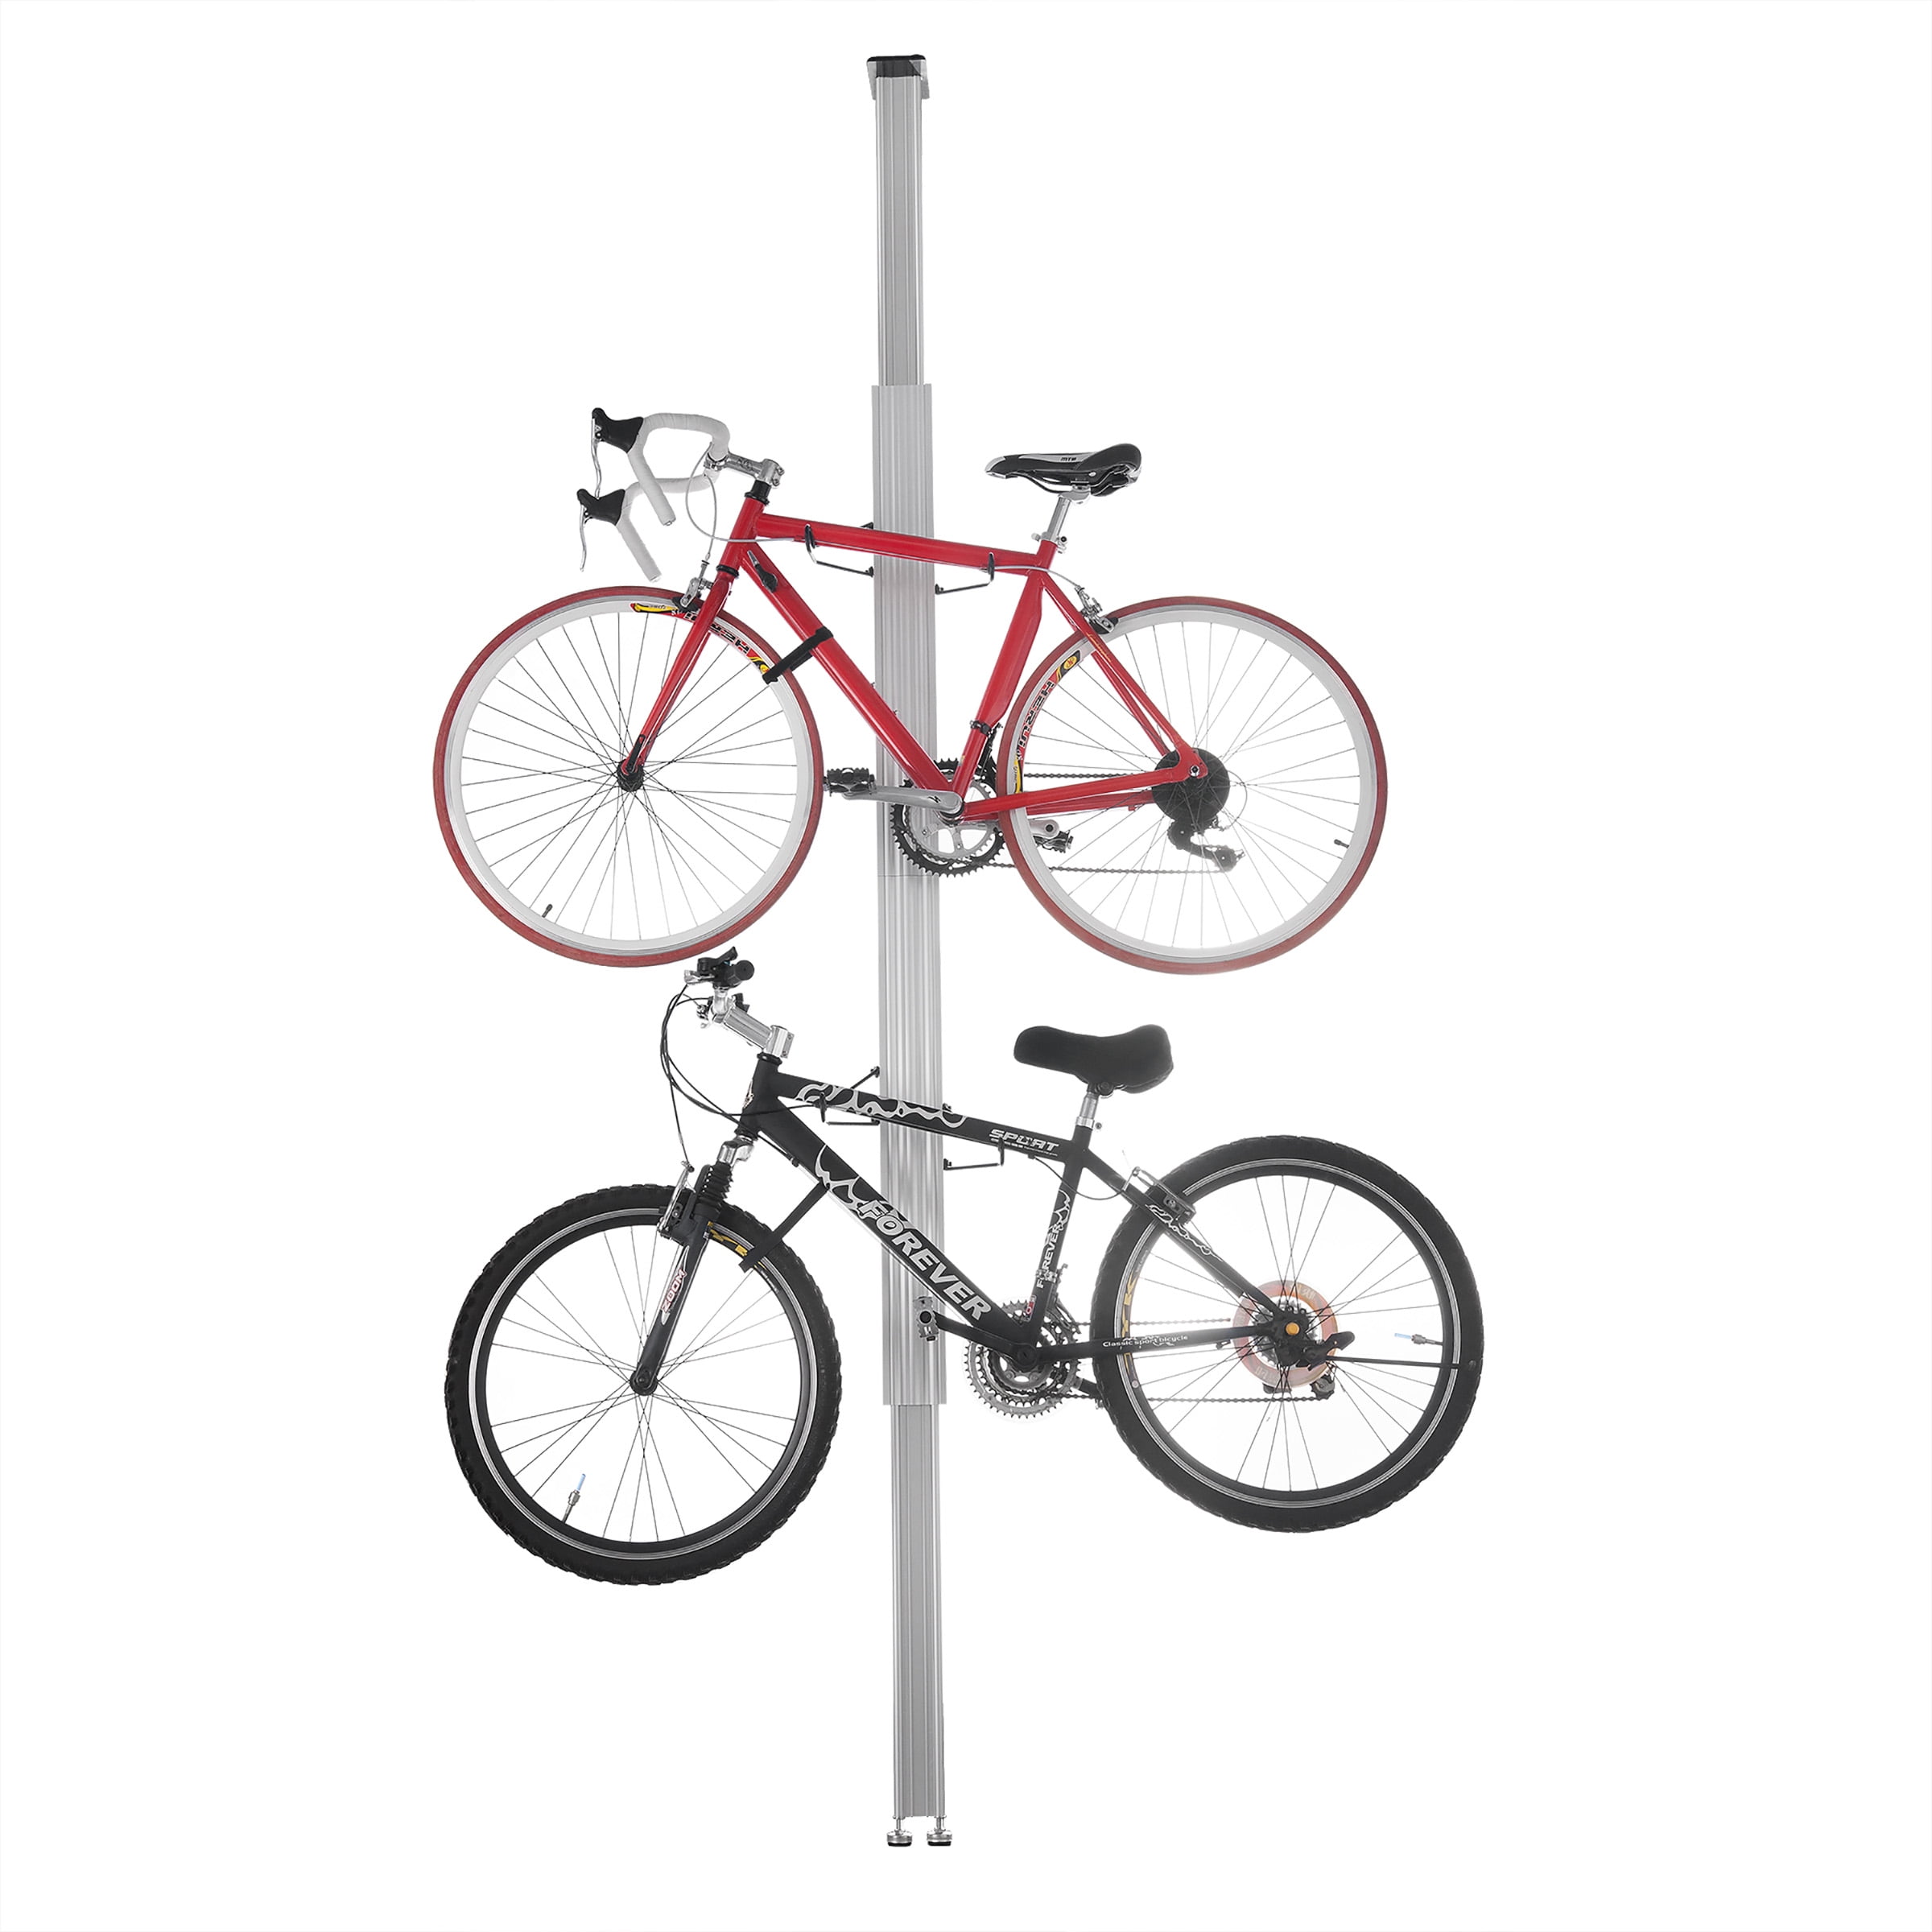 Details about   Rad Cycle Woody Bike Stand Bicycle Rack Storage Or Display Holds Two Bicycles An 